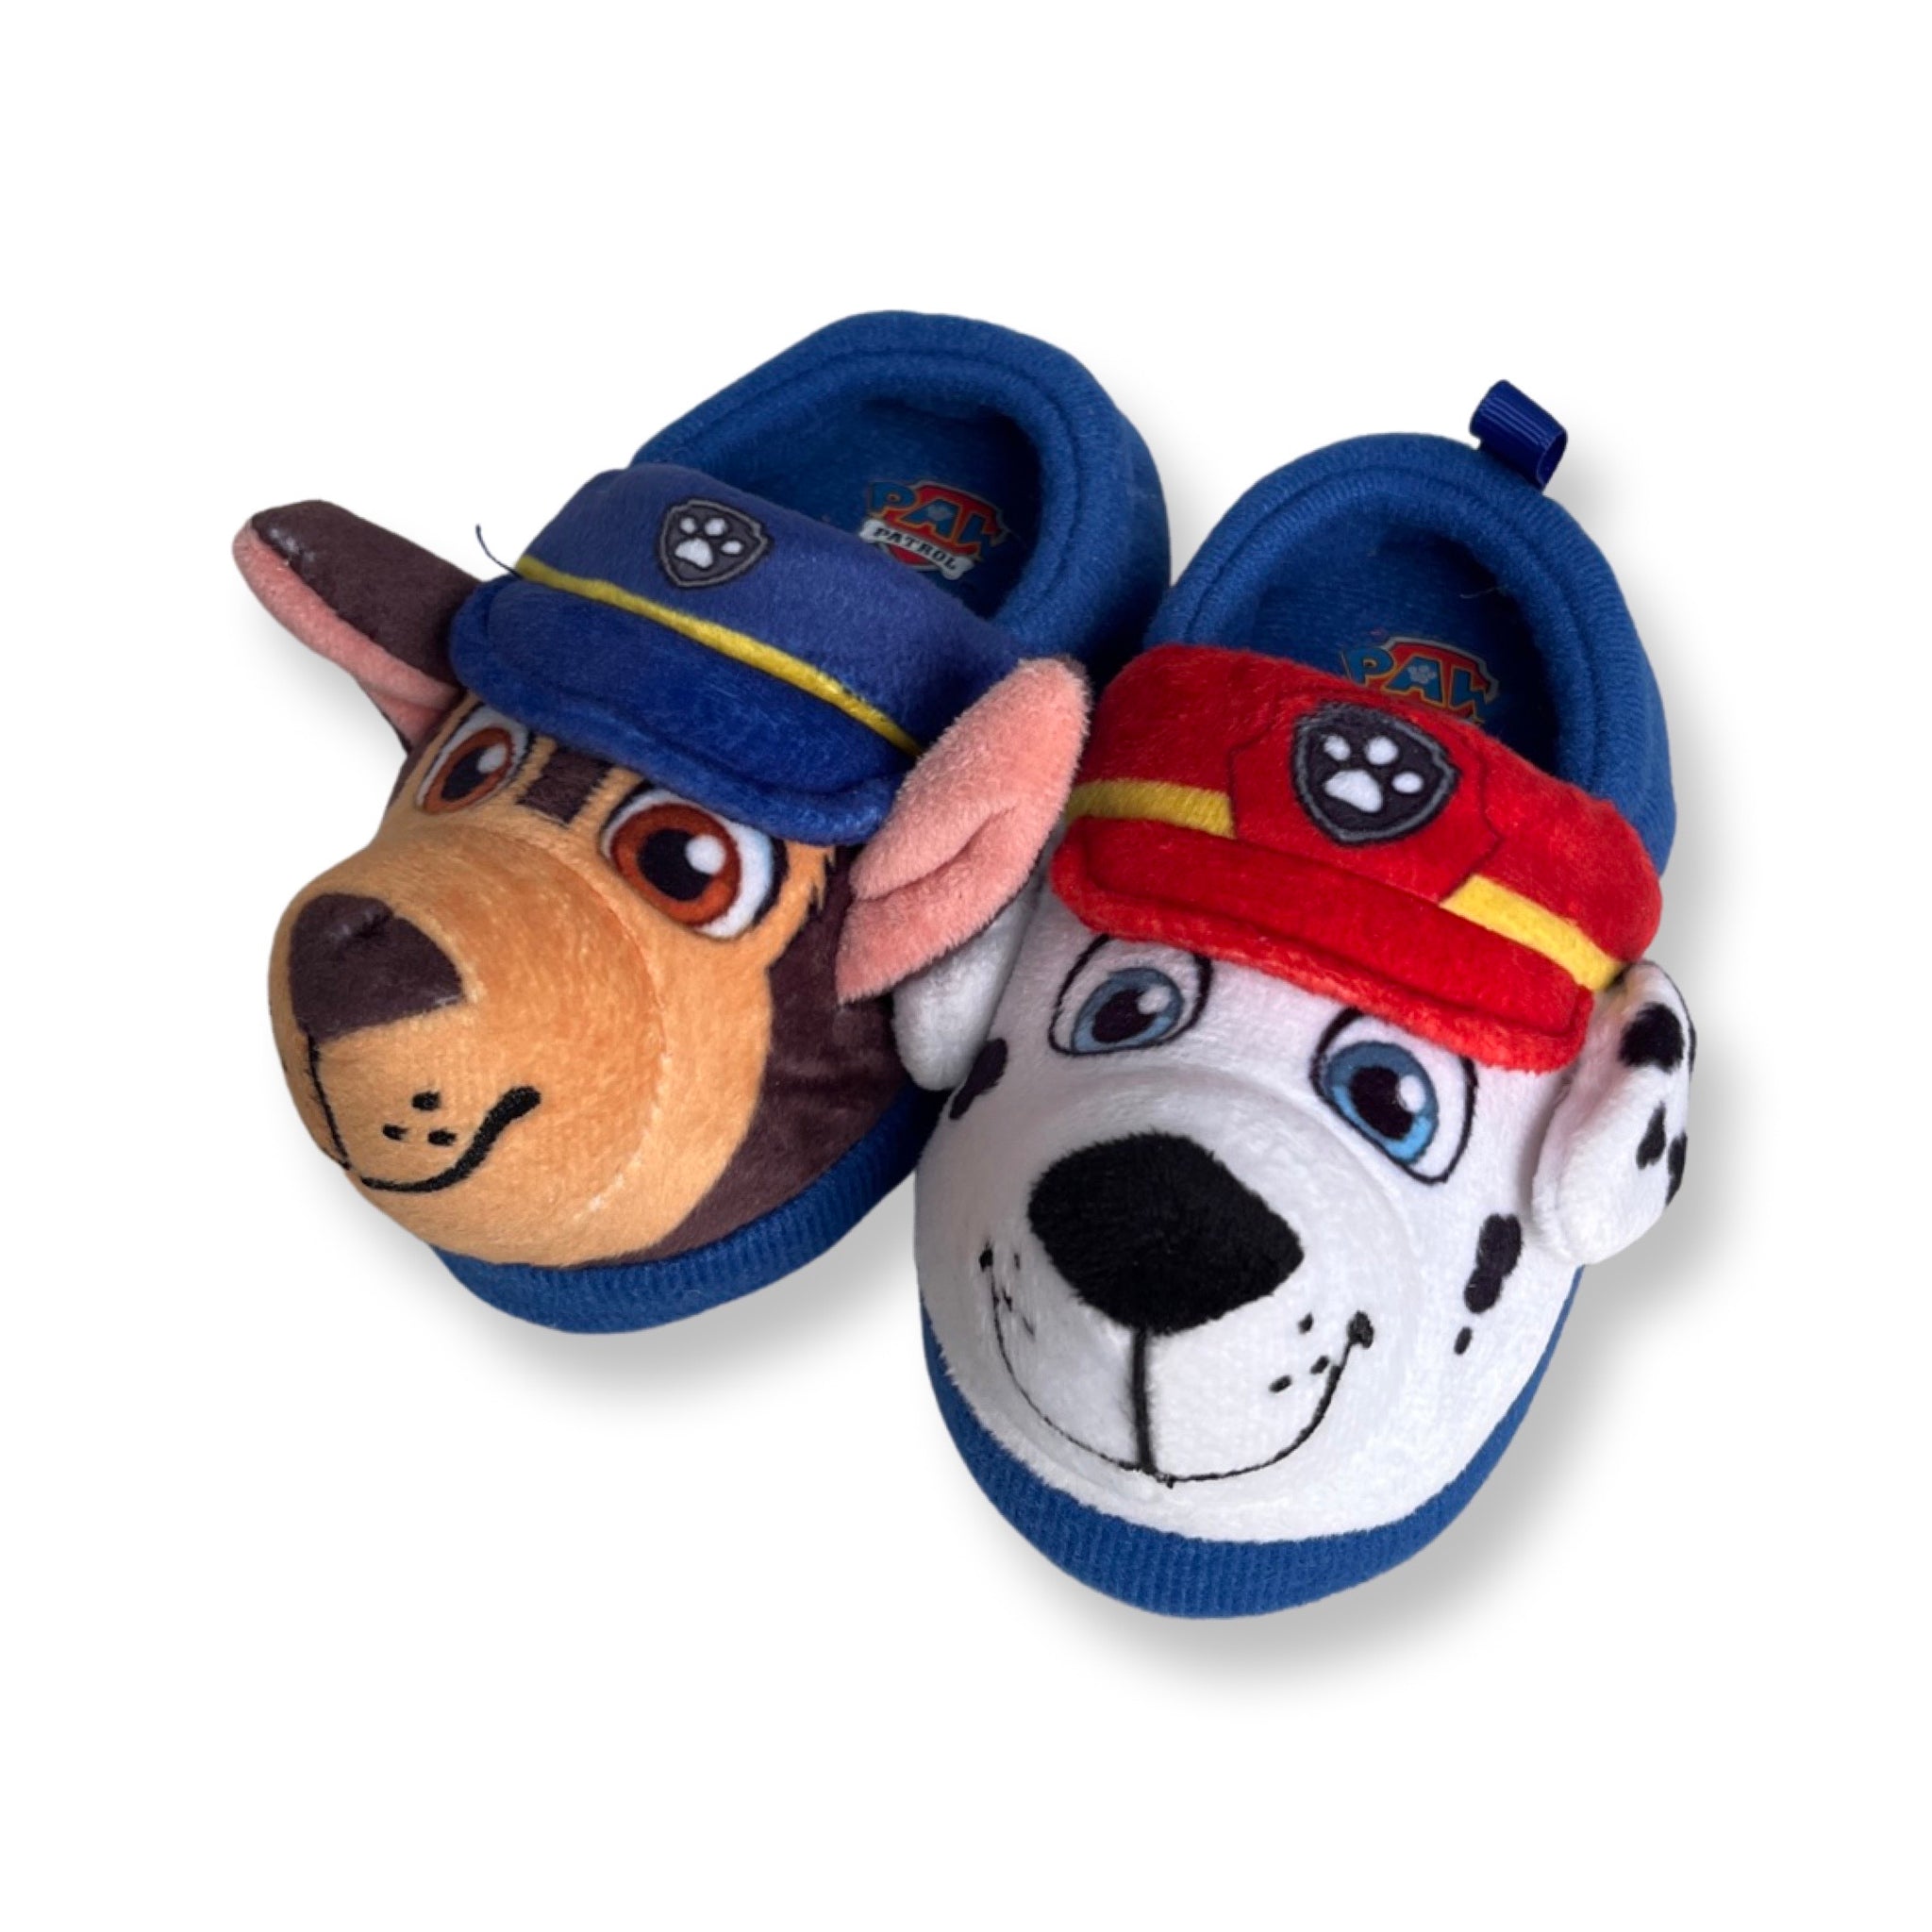 Paw Patrol Plush Kids Slippers - Chase and Marshall